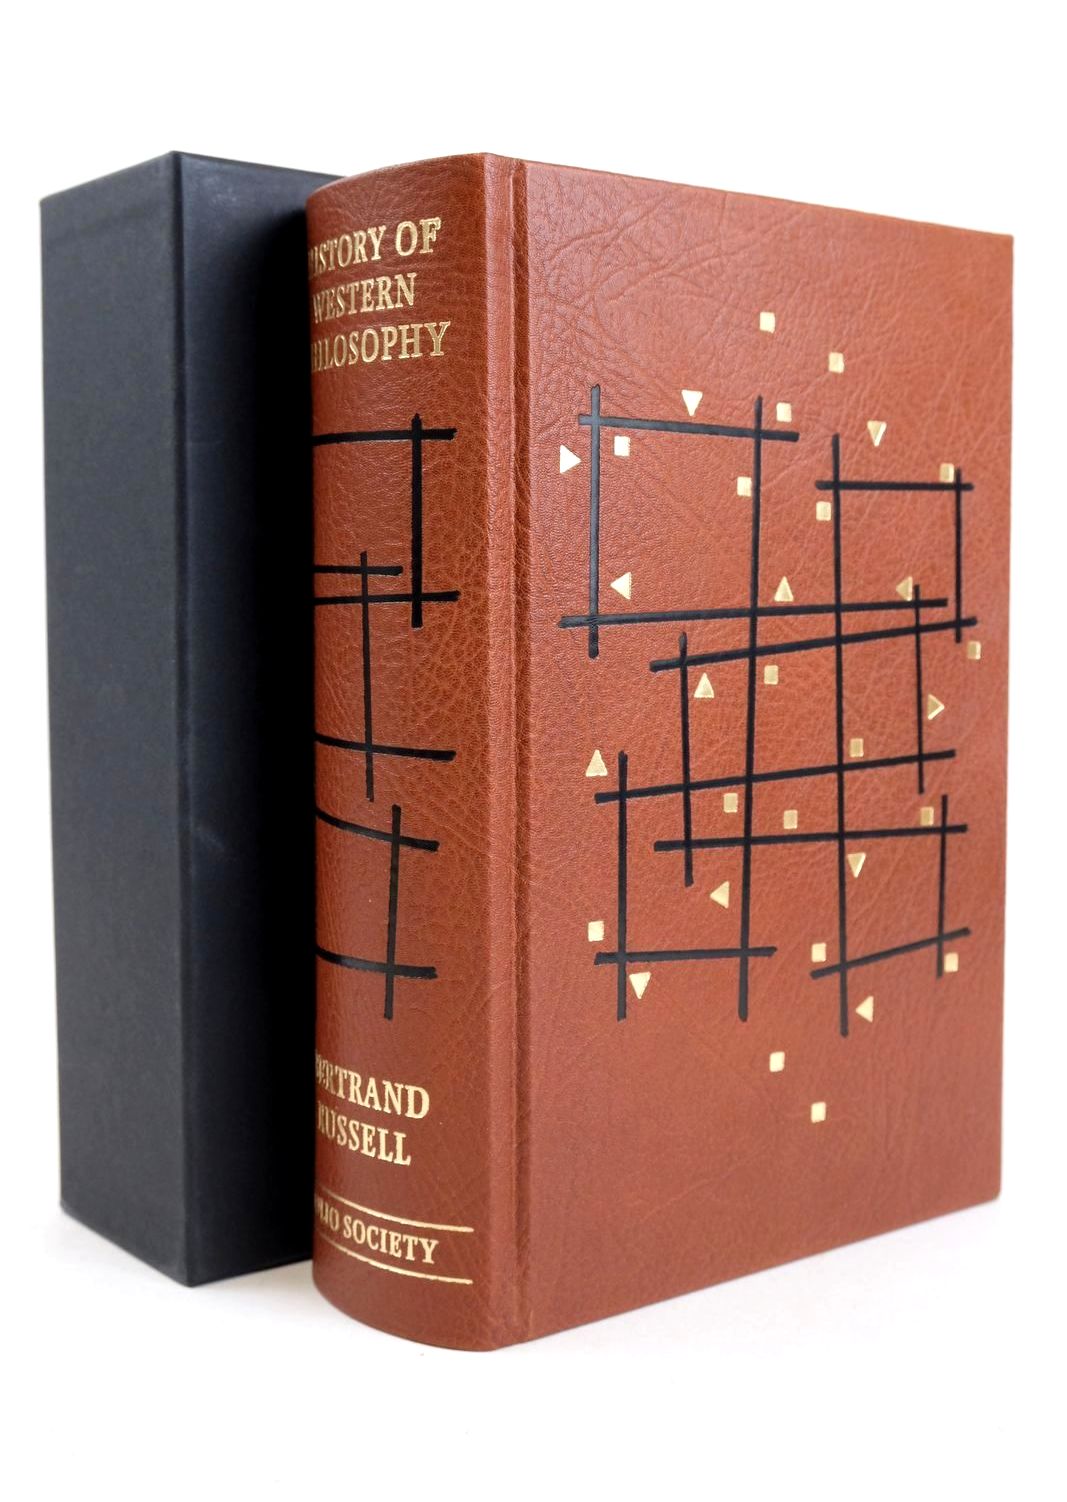 Photo of HISTORY OF WESTERN PHILOSOPHY written by Russell, Bertrand Grayling, A.C. published by Folio Society (STOCK CODE: 1327599)  for sale by Stella & Rose's Books